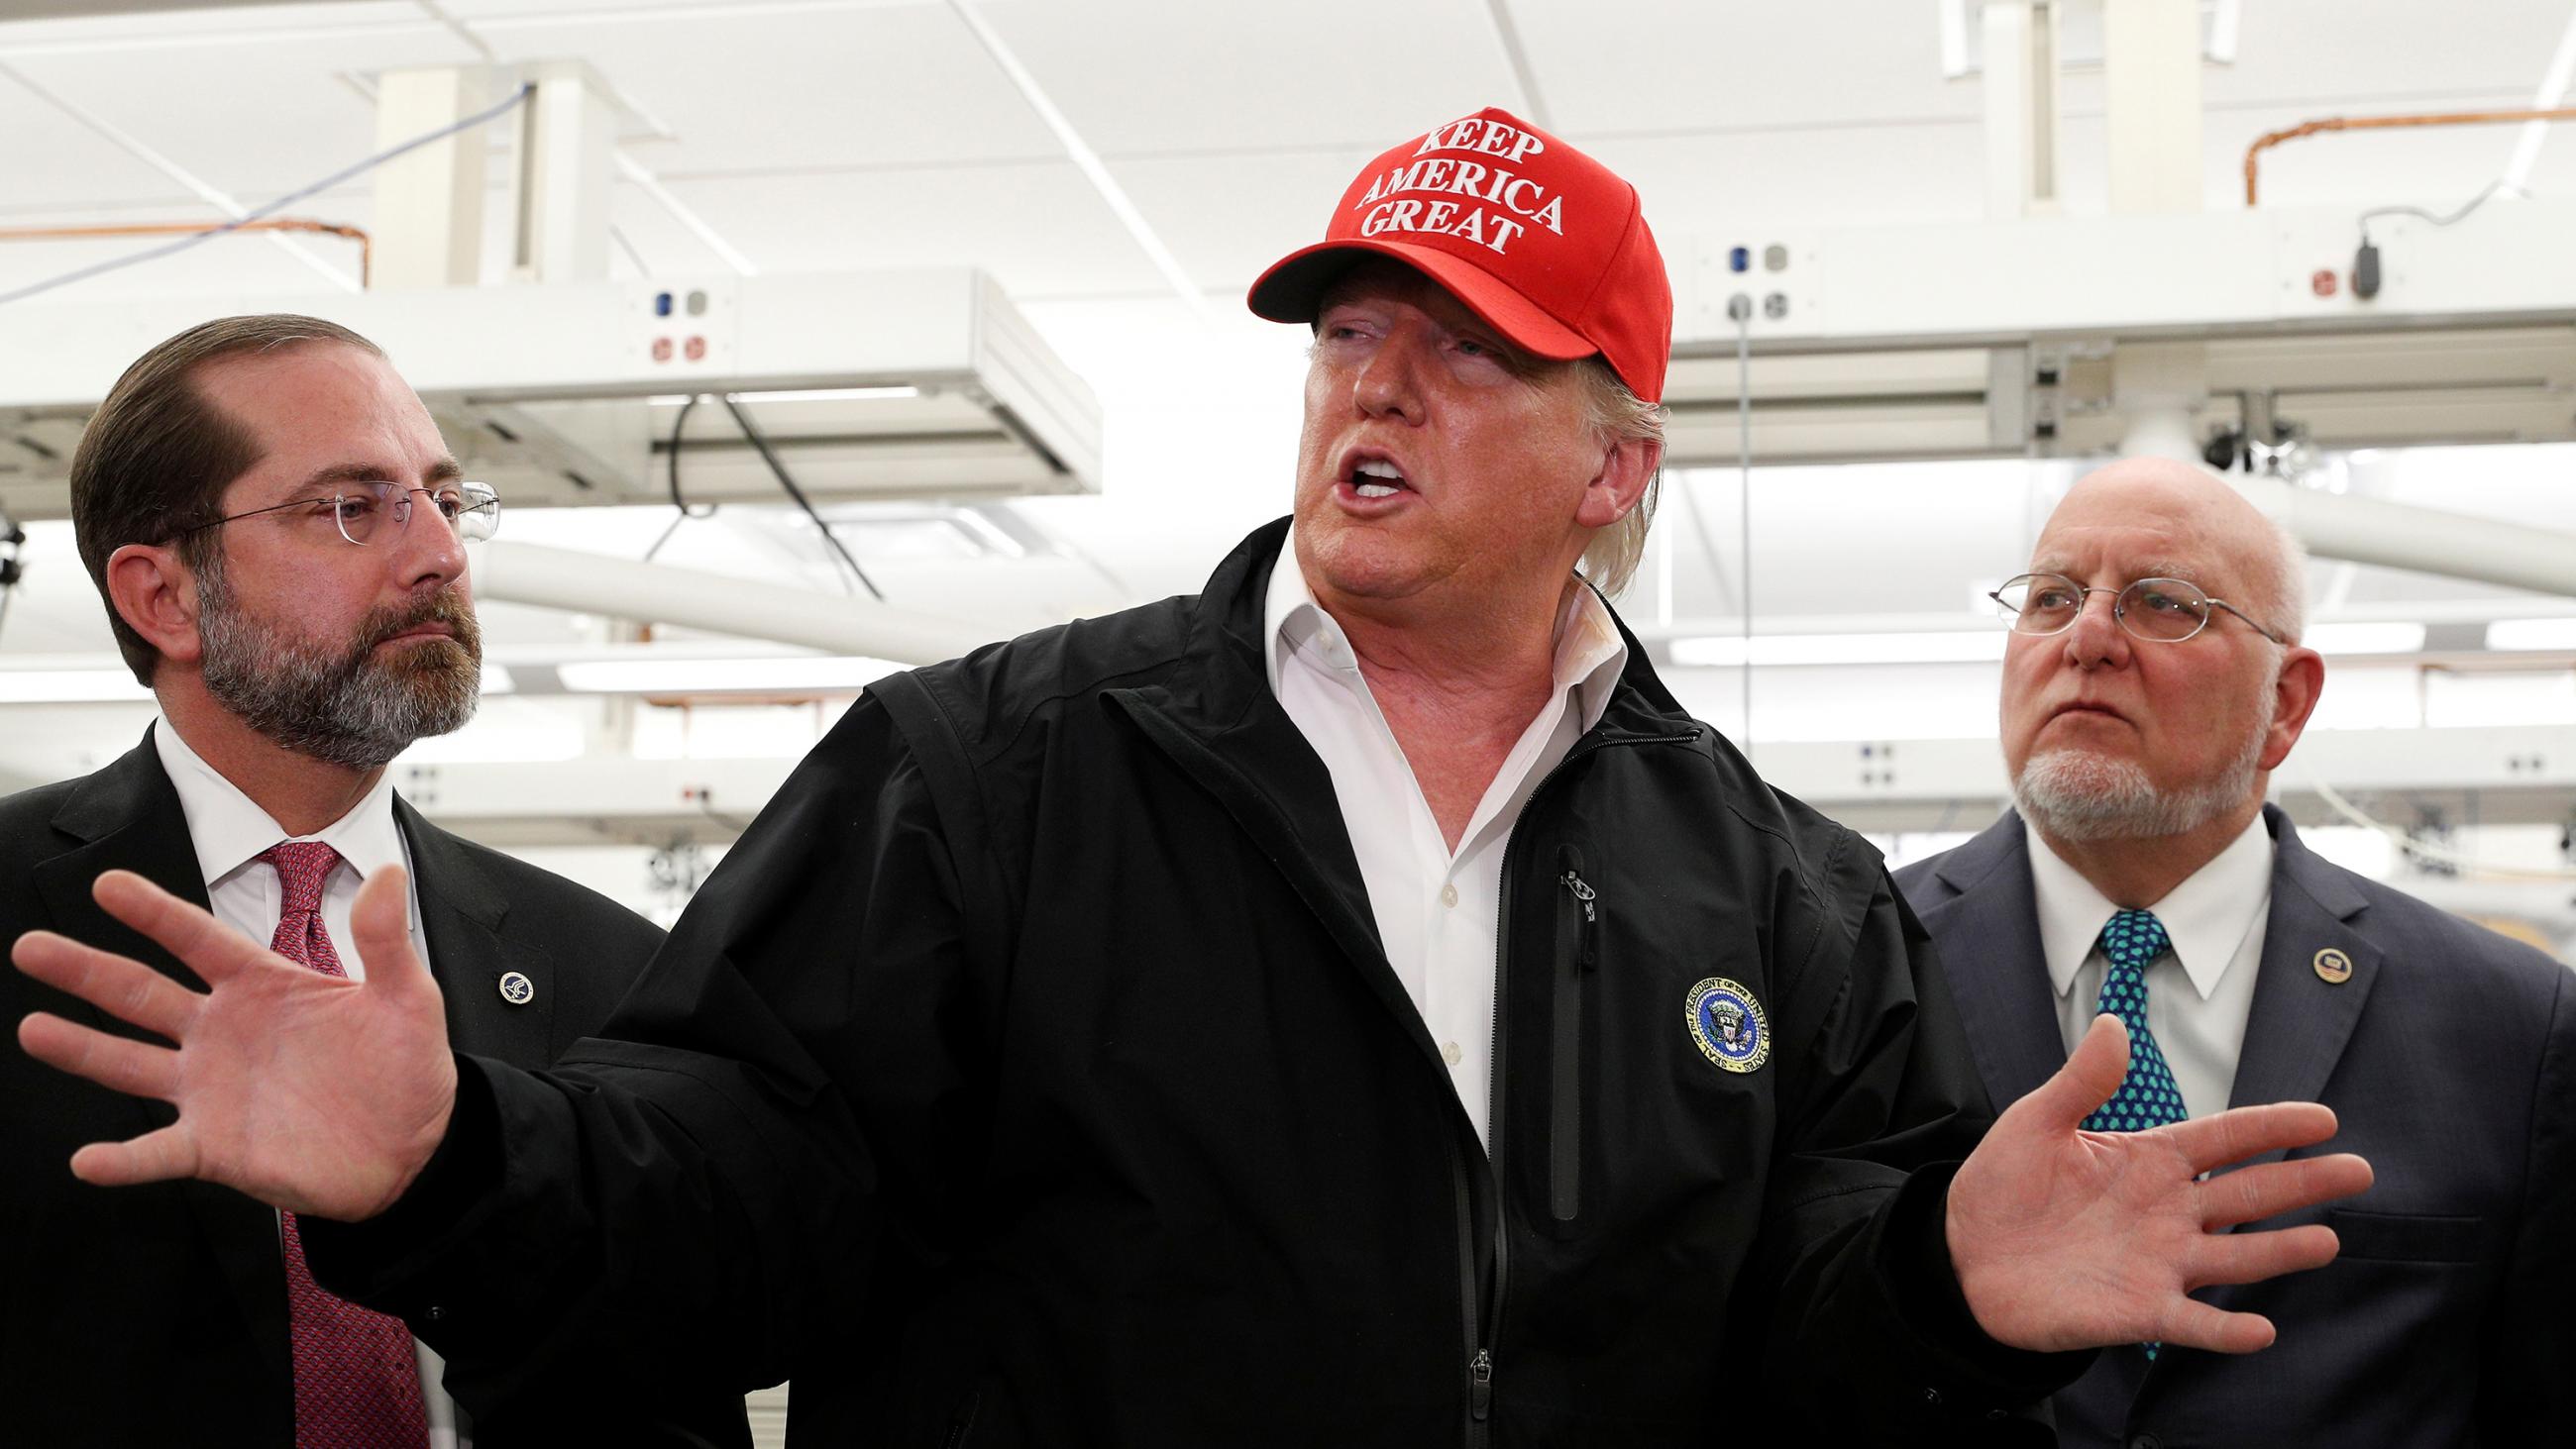 The photo shows the president with a "Make America Great Again" hat speaking and gesturing with his hands. 